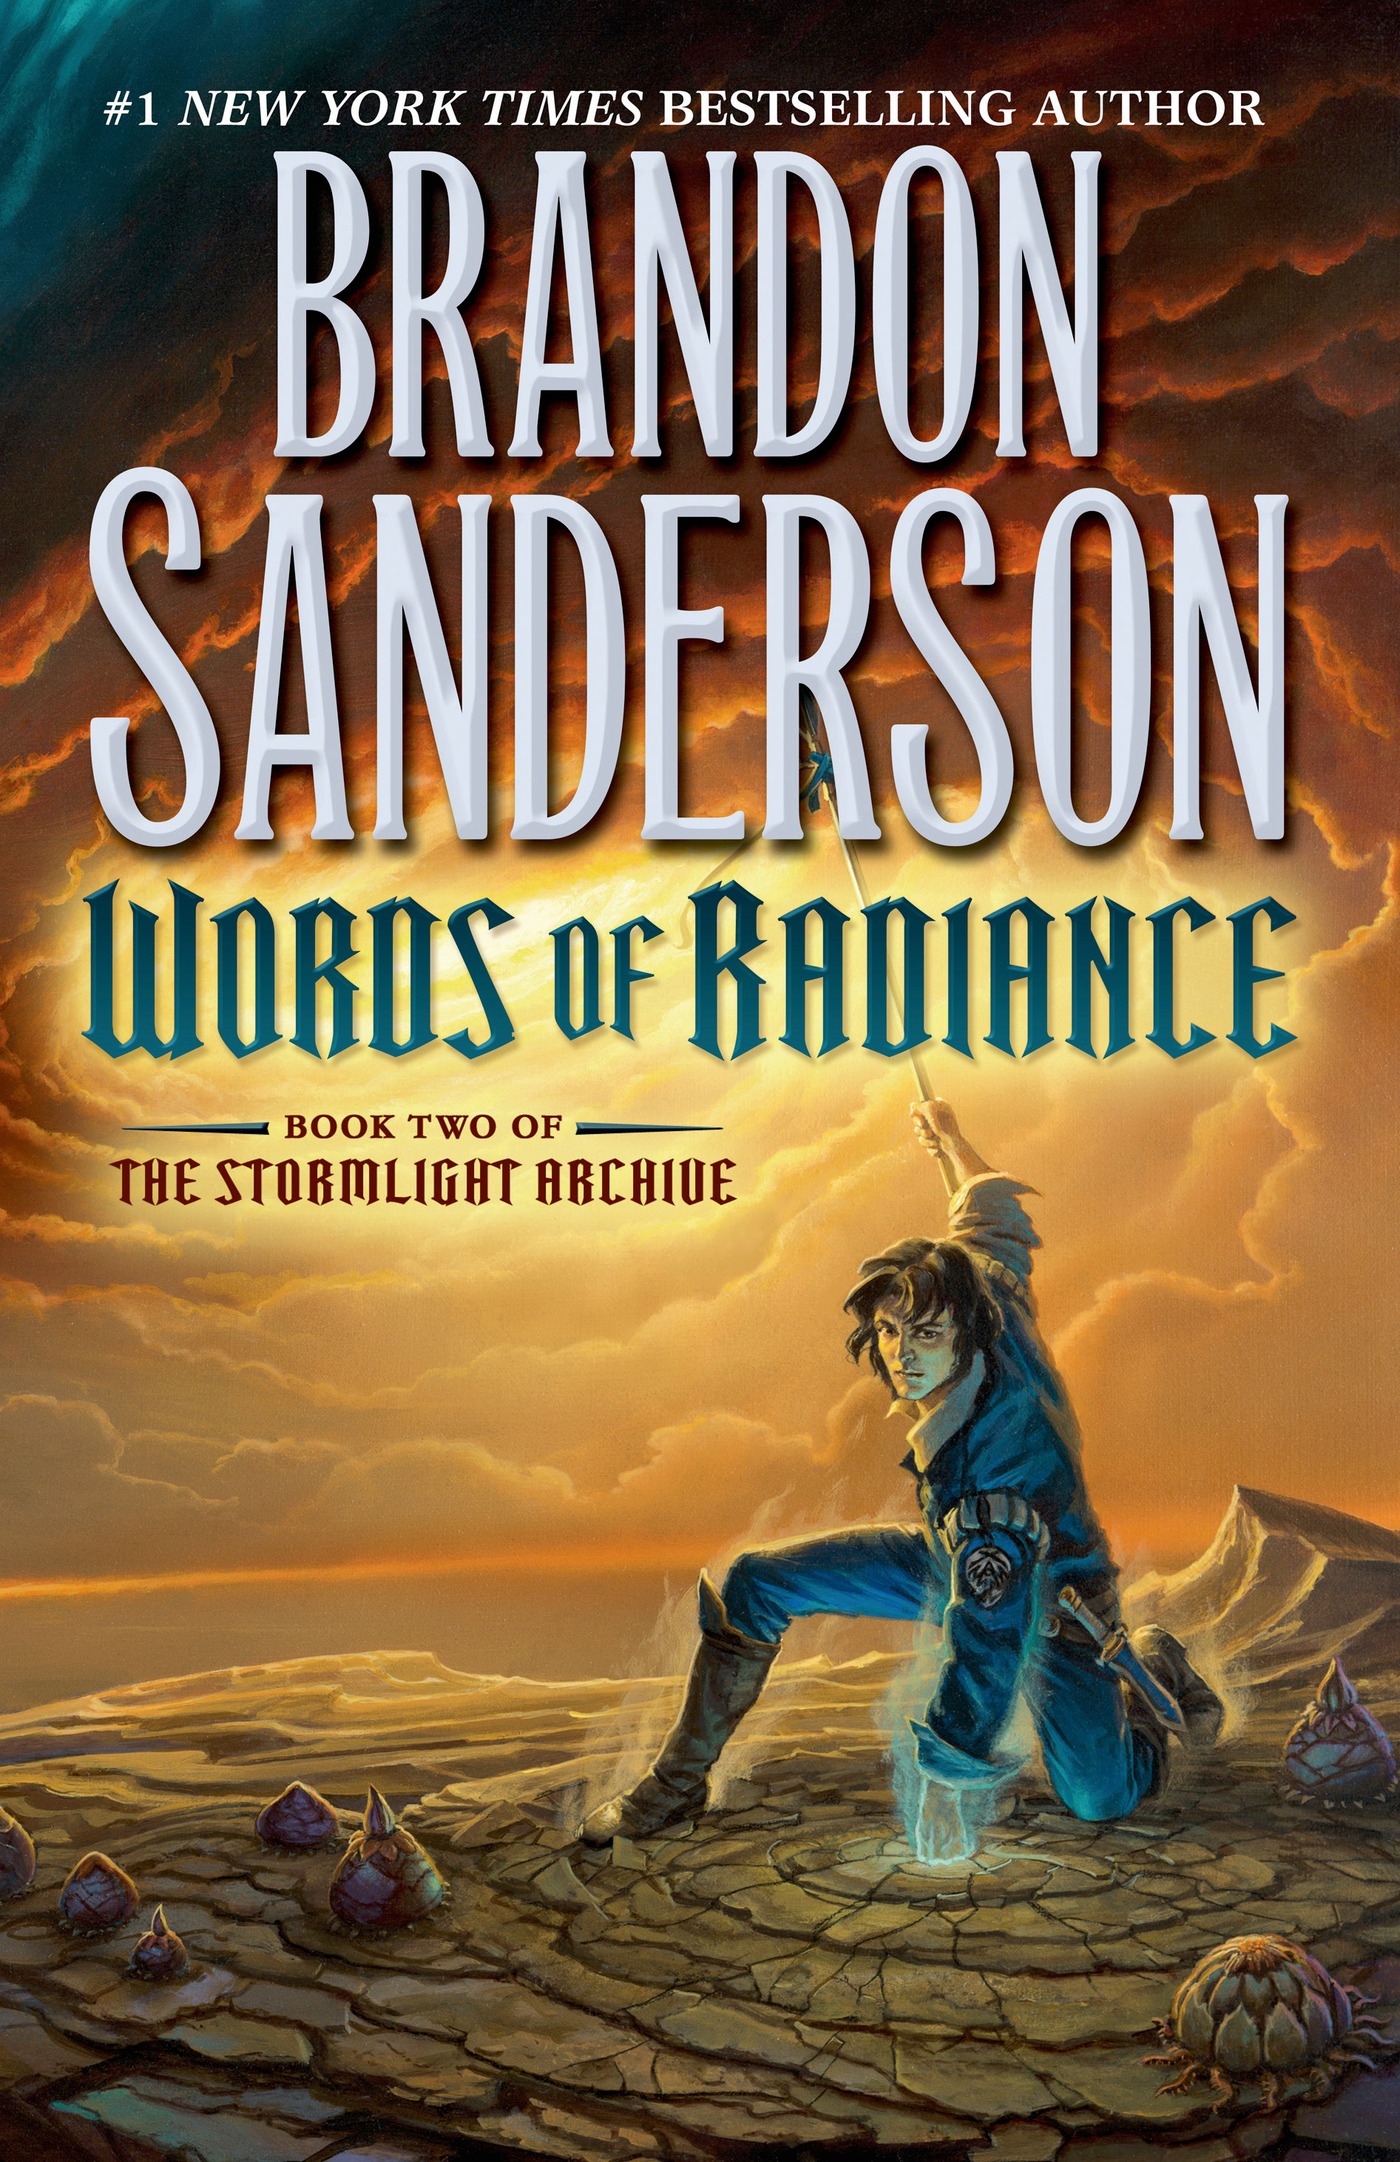 [EPUB] The Stormlight Archive #2 Words of Radiance by Brandon Sanderson